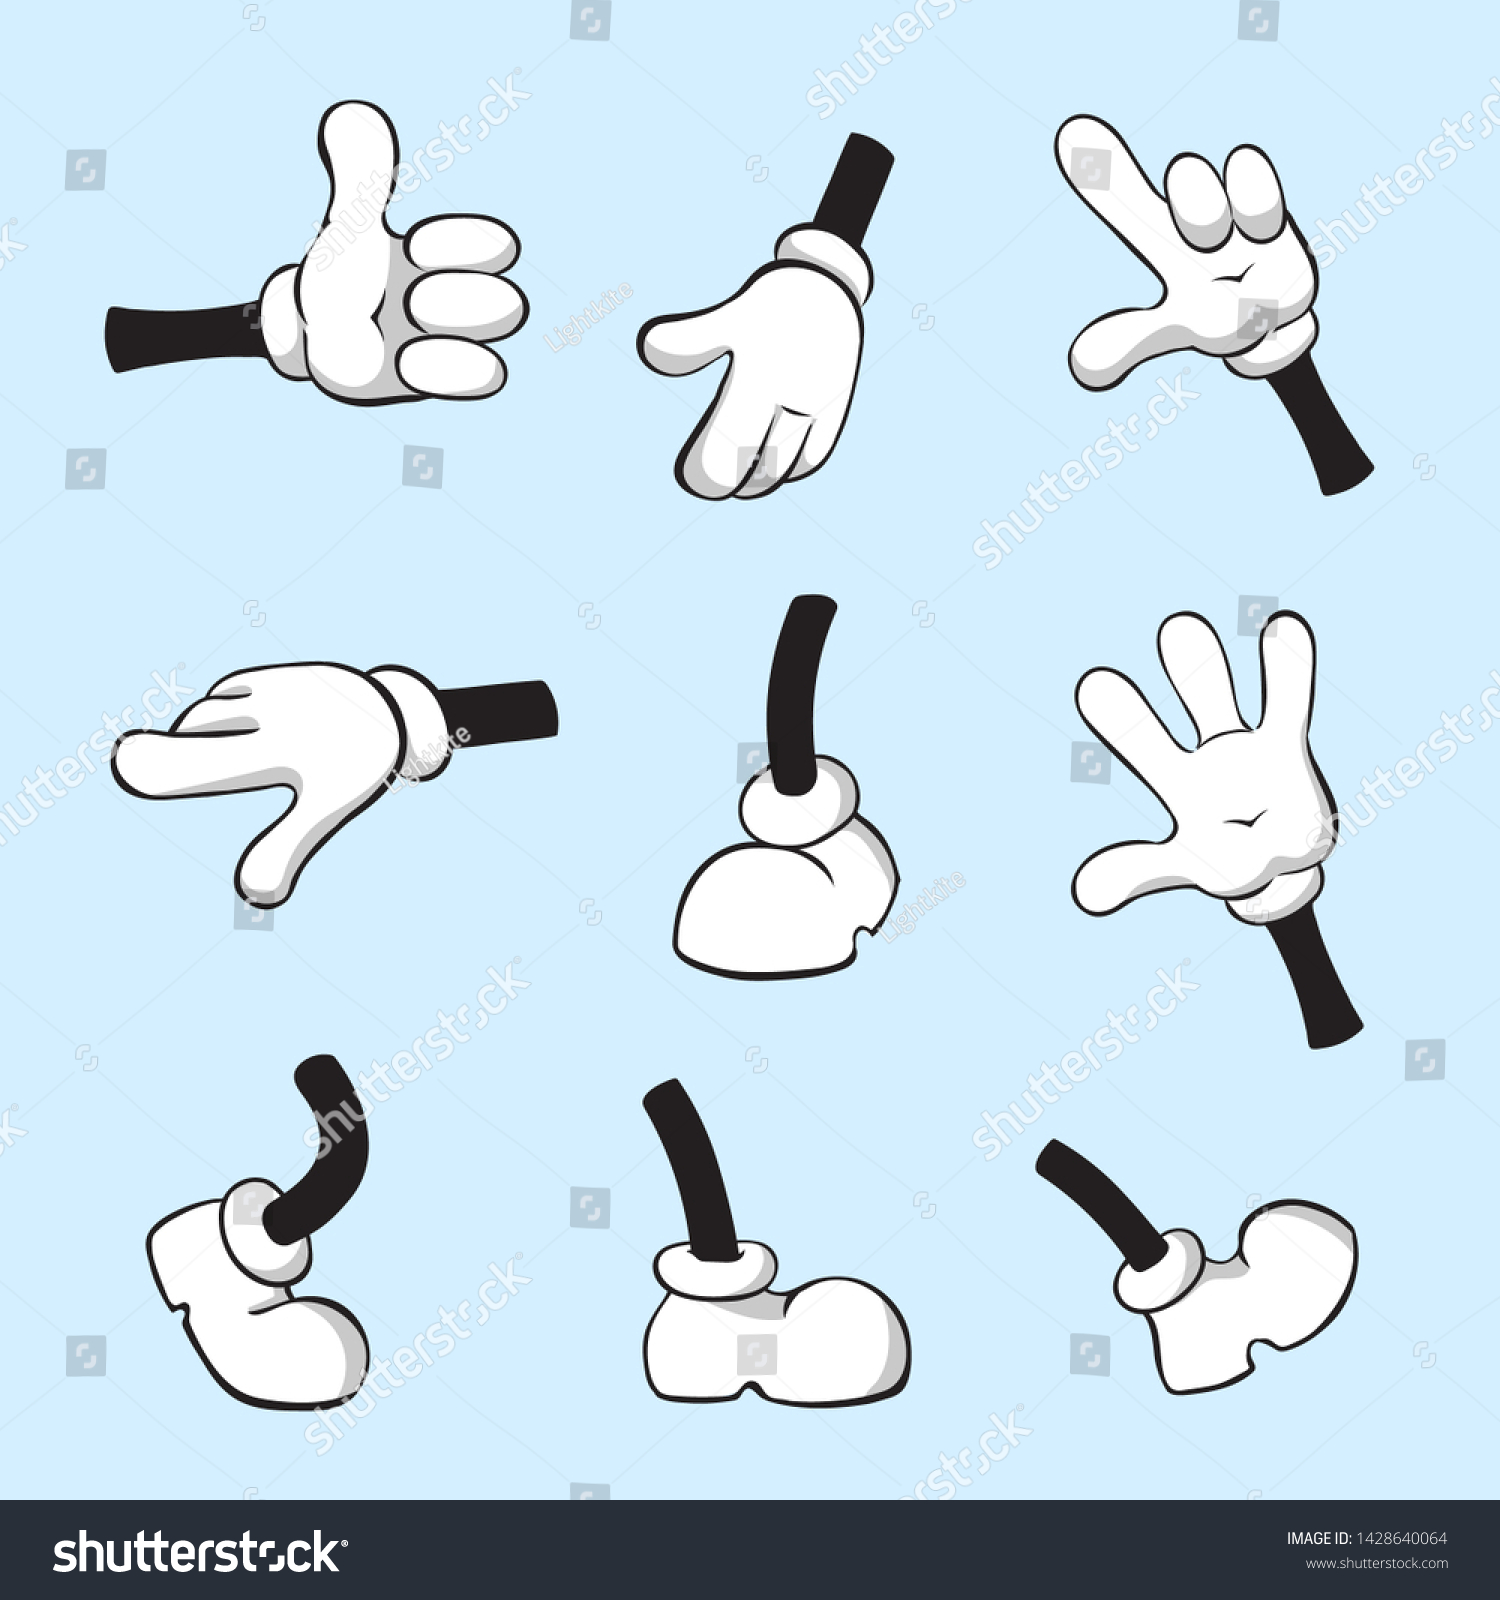 Cartoon hands and legs set for animation #1428640064